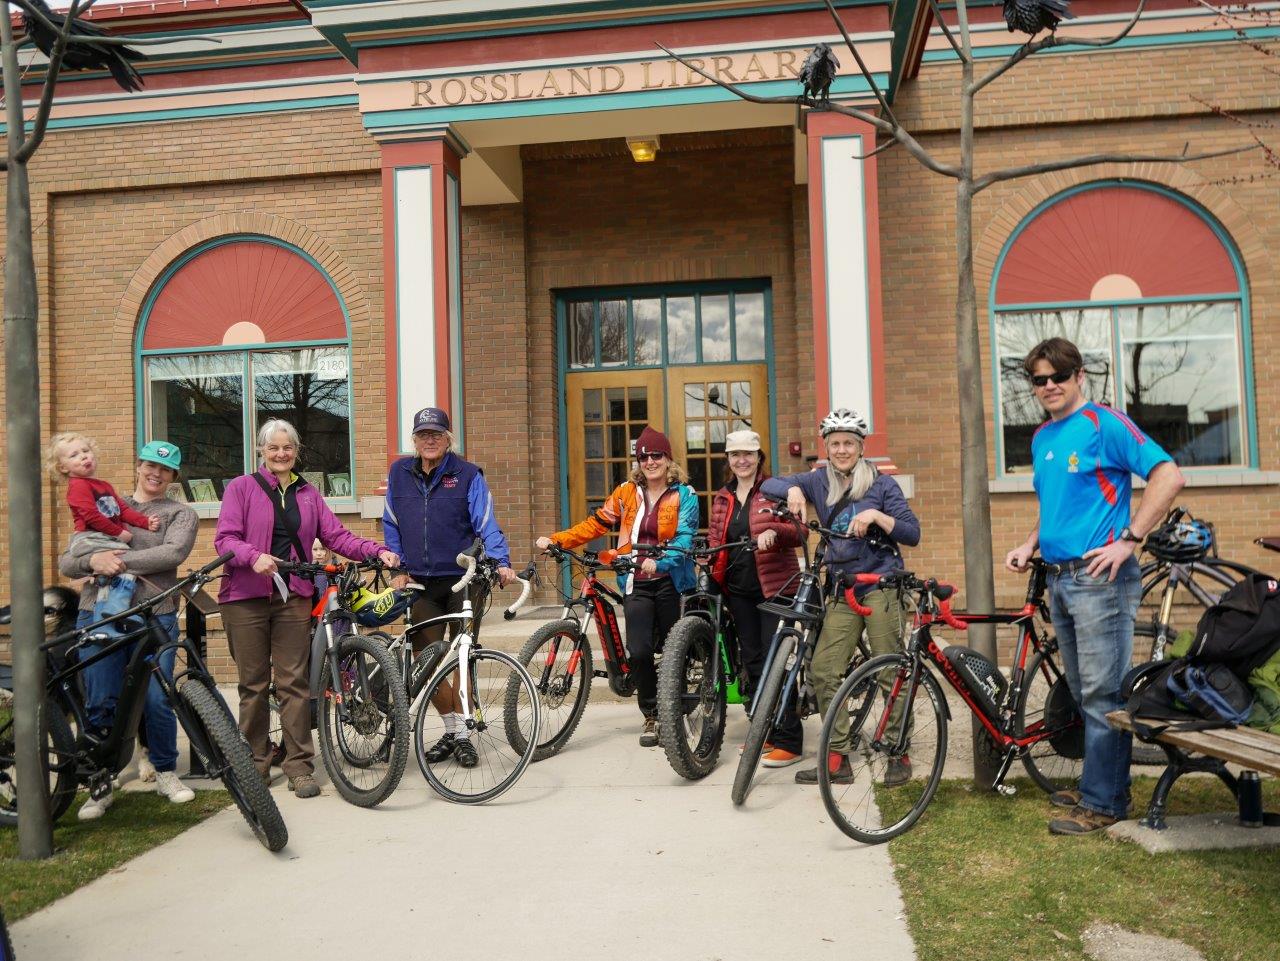 Would you commute by e-bike between Rossland and Trail? Please respond!